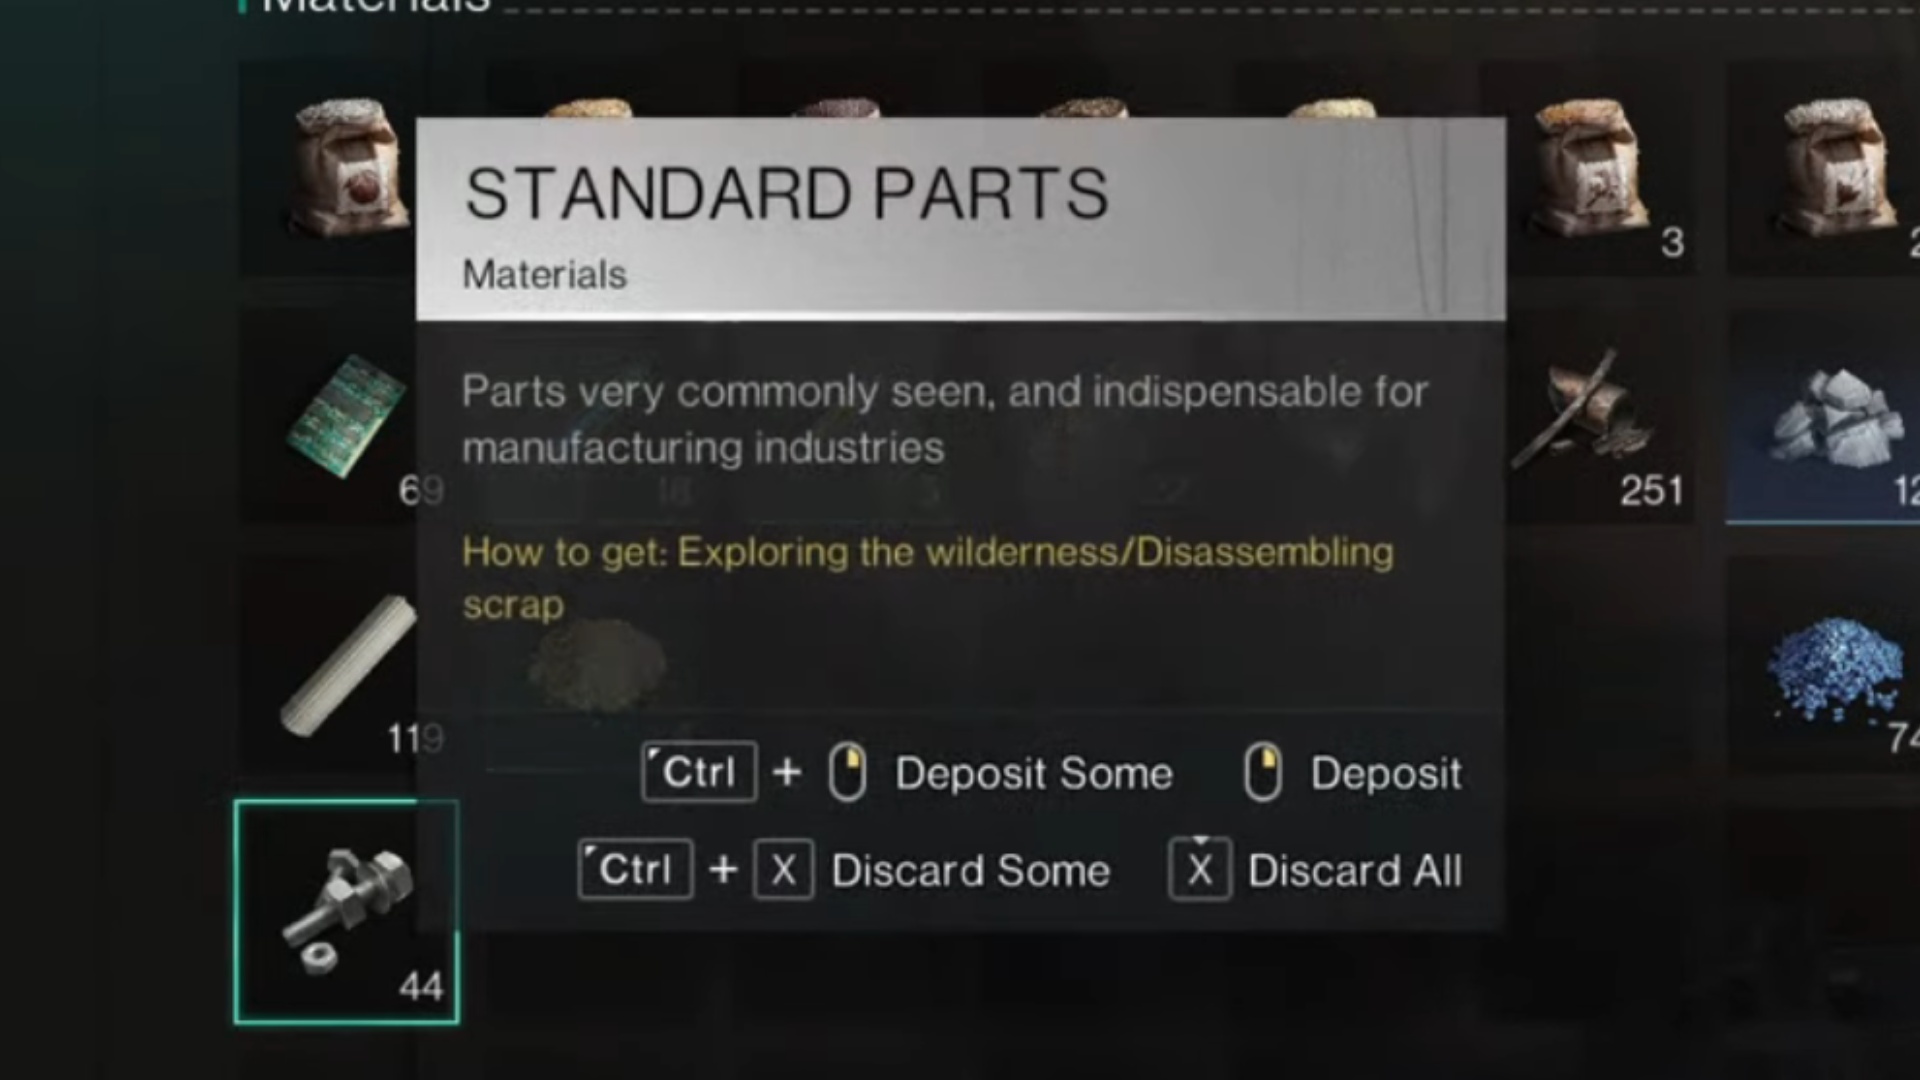 Once Human Standard Parts